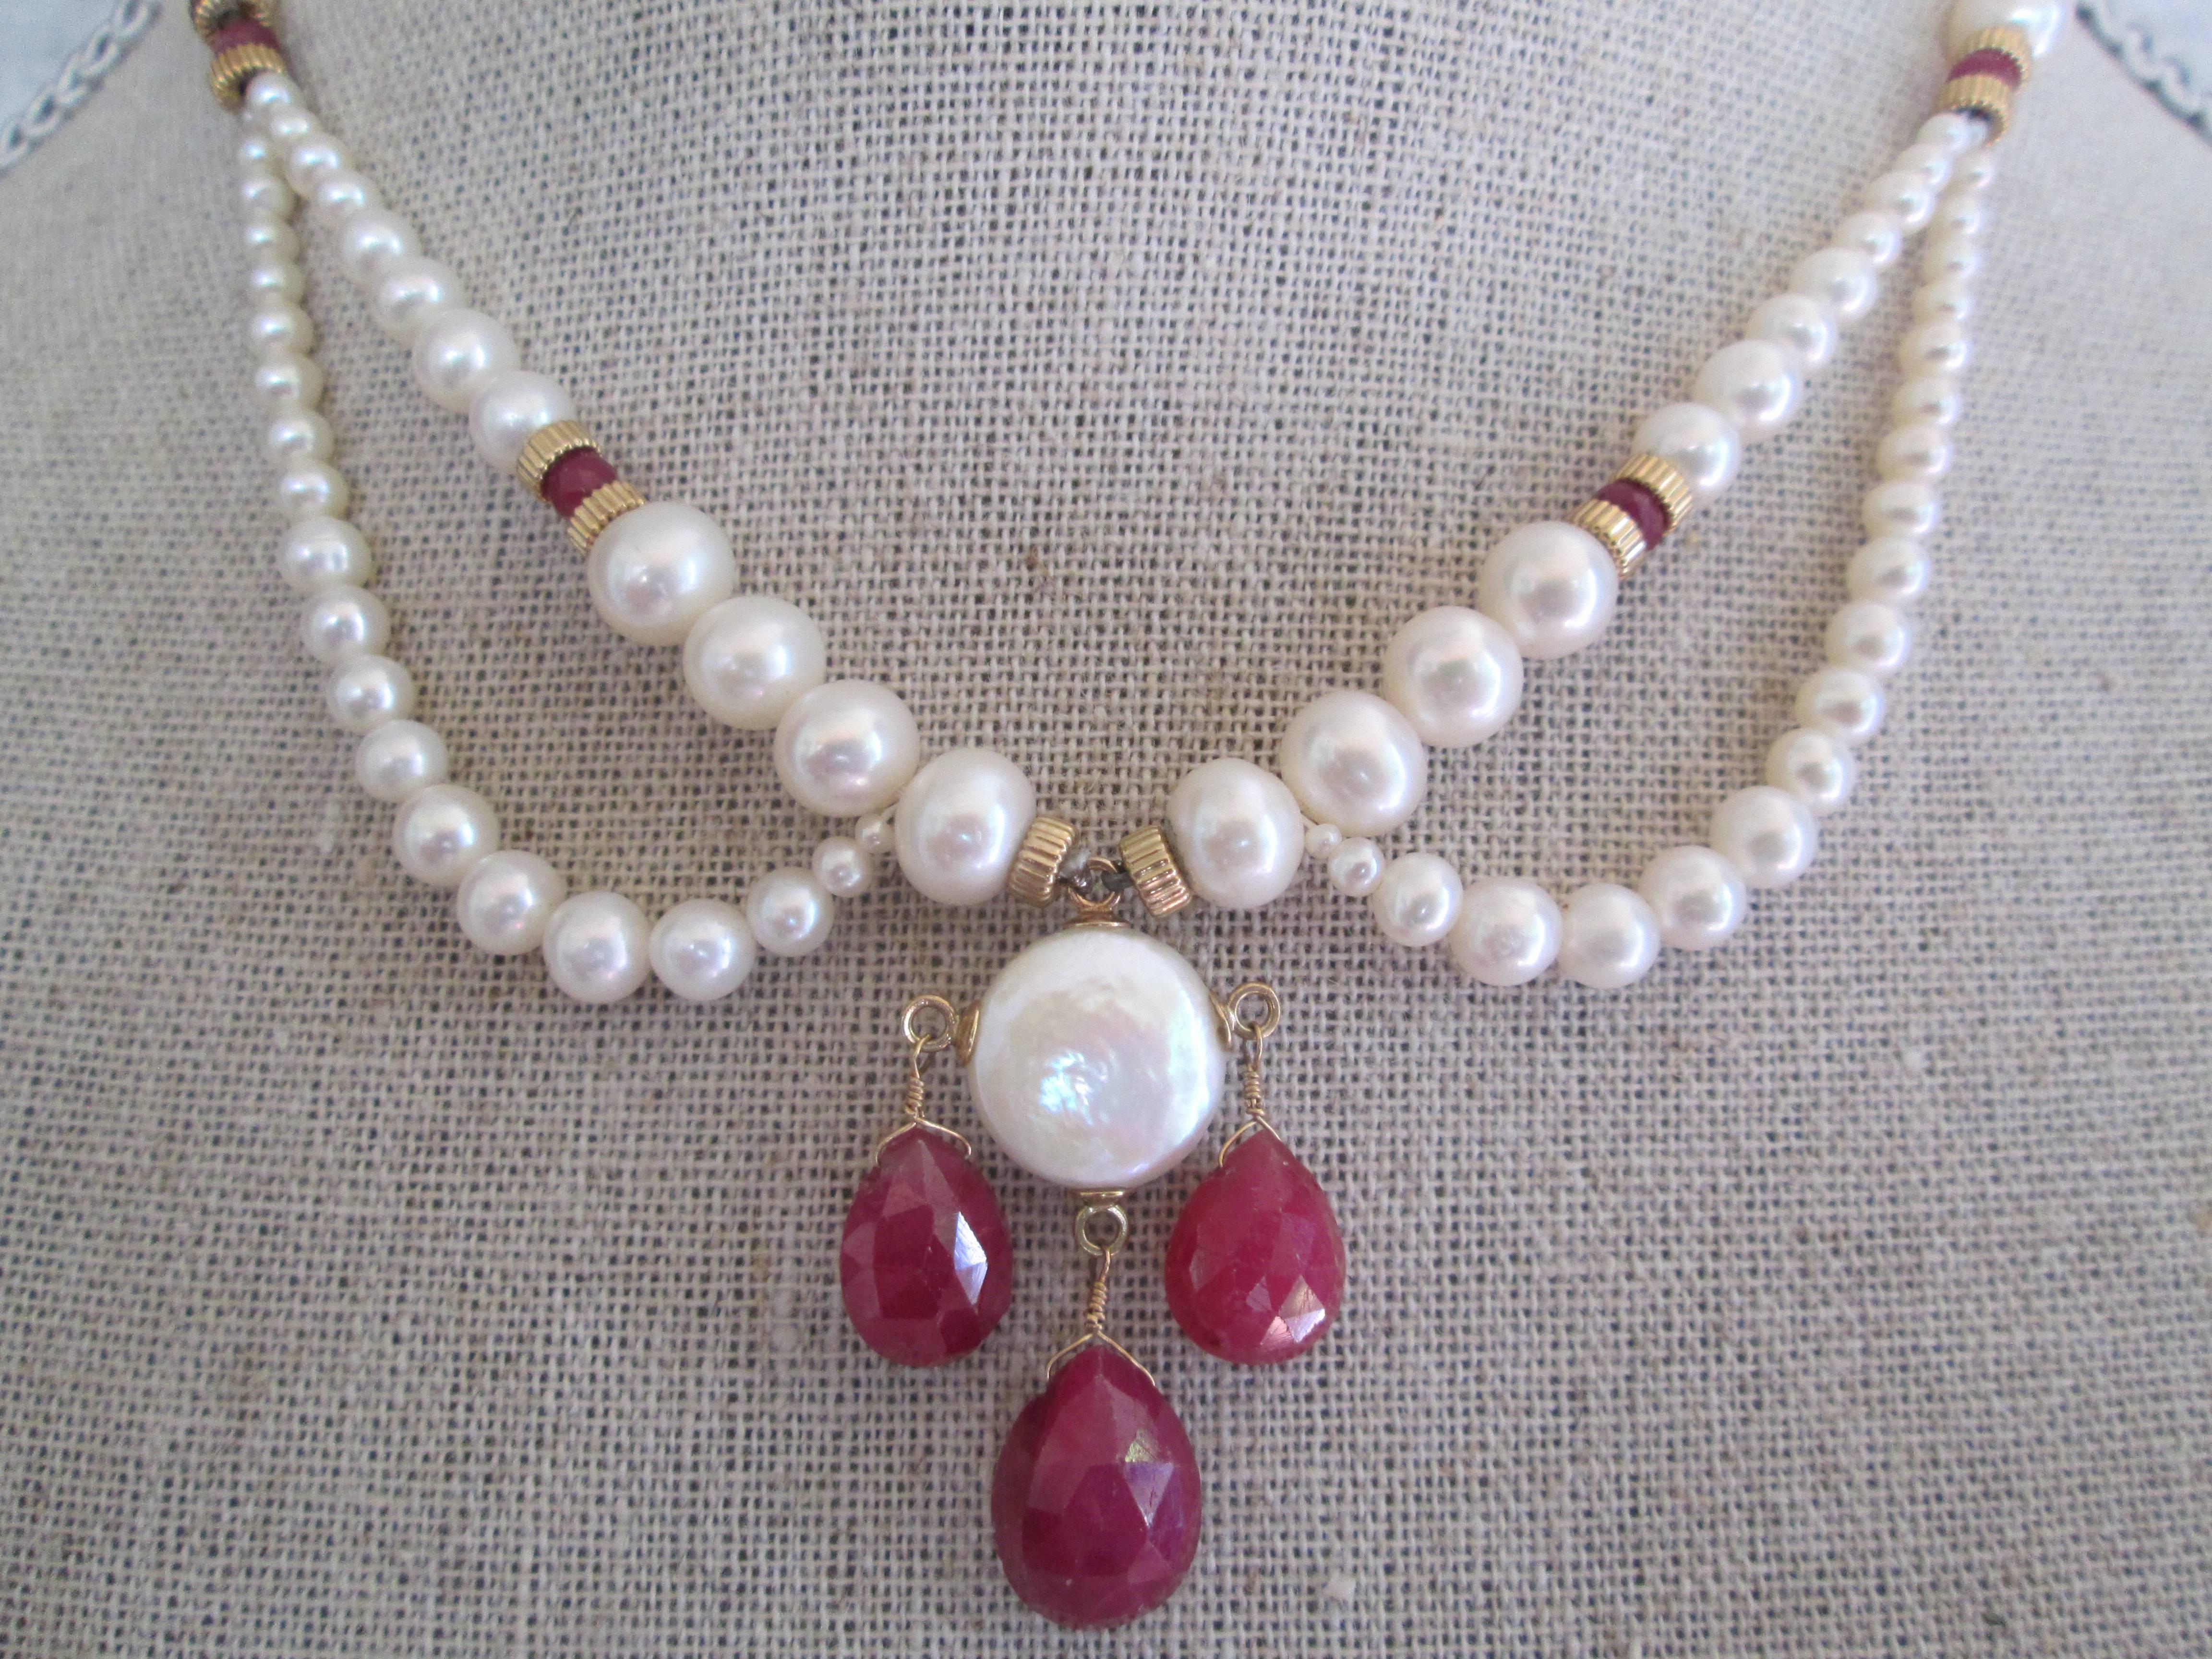 Uniquely graduated pearl necklace with ruby briolettes attached with 14k yellow gold findings, beads, and clasp. Centerpiece his highlighted by round, coin pearl. Lightweight, and graceful. Great for weddings, graduations, and other formal